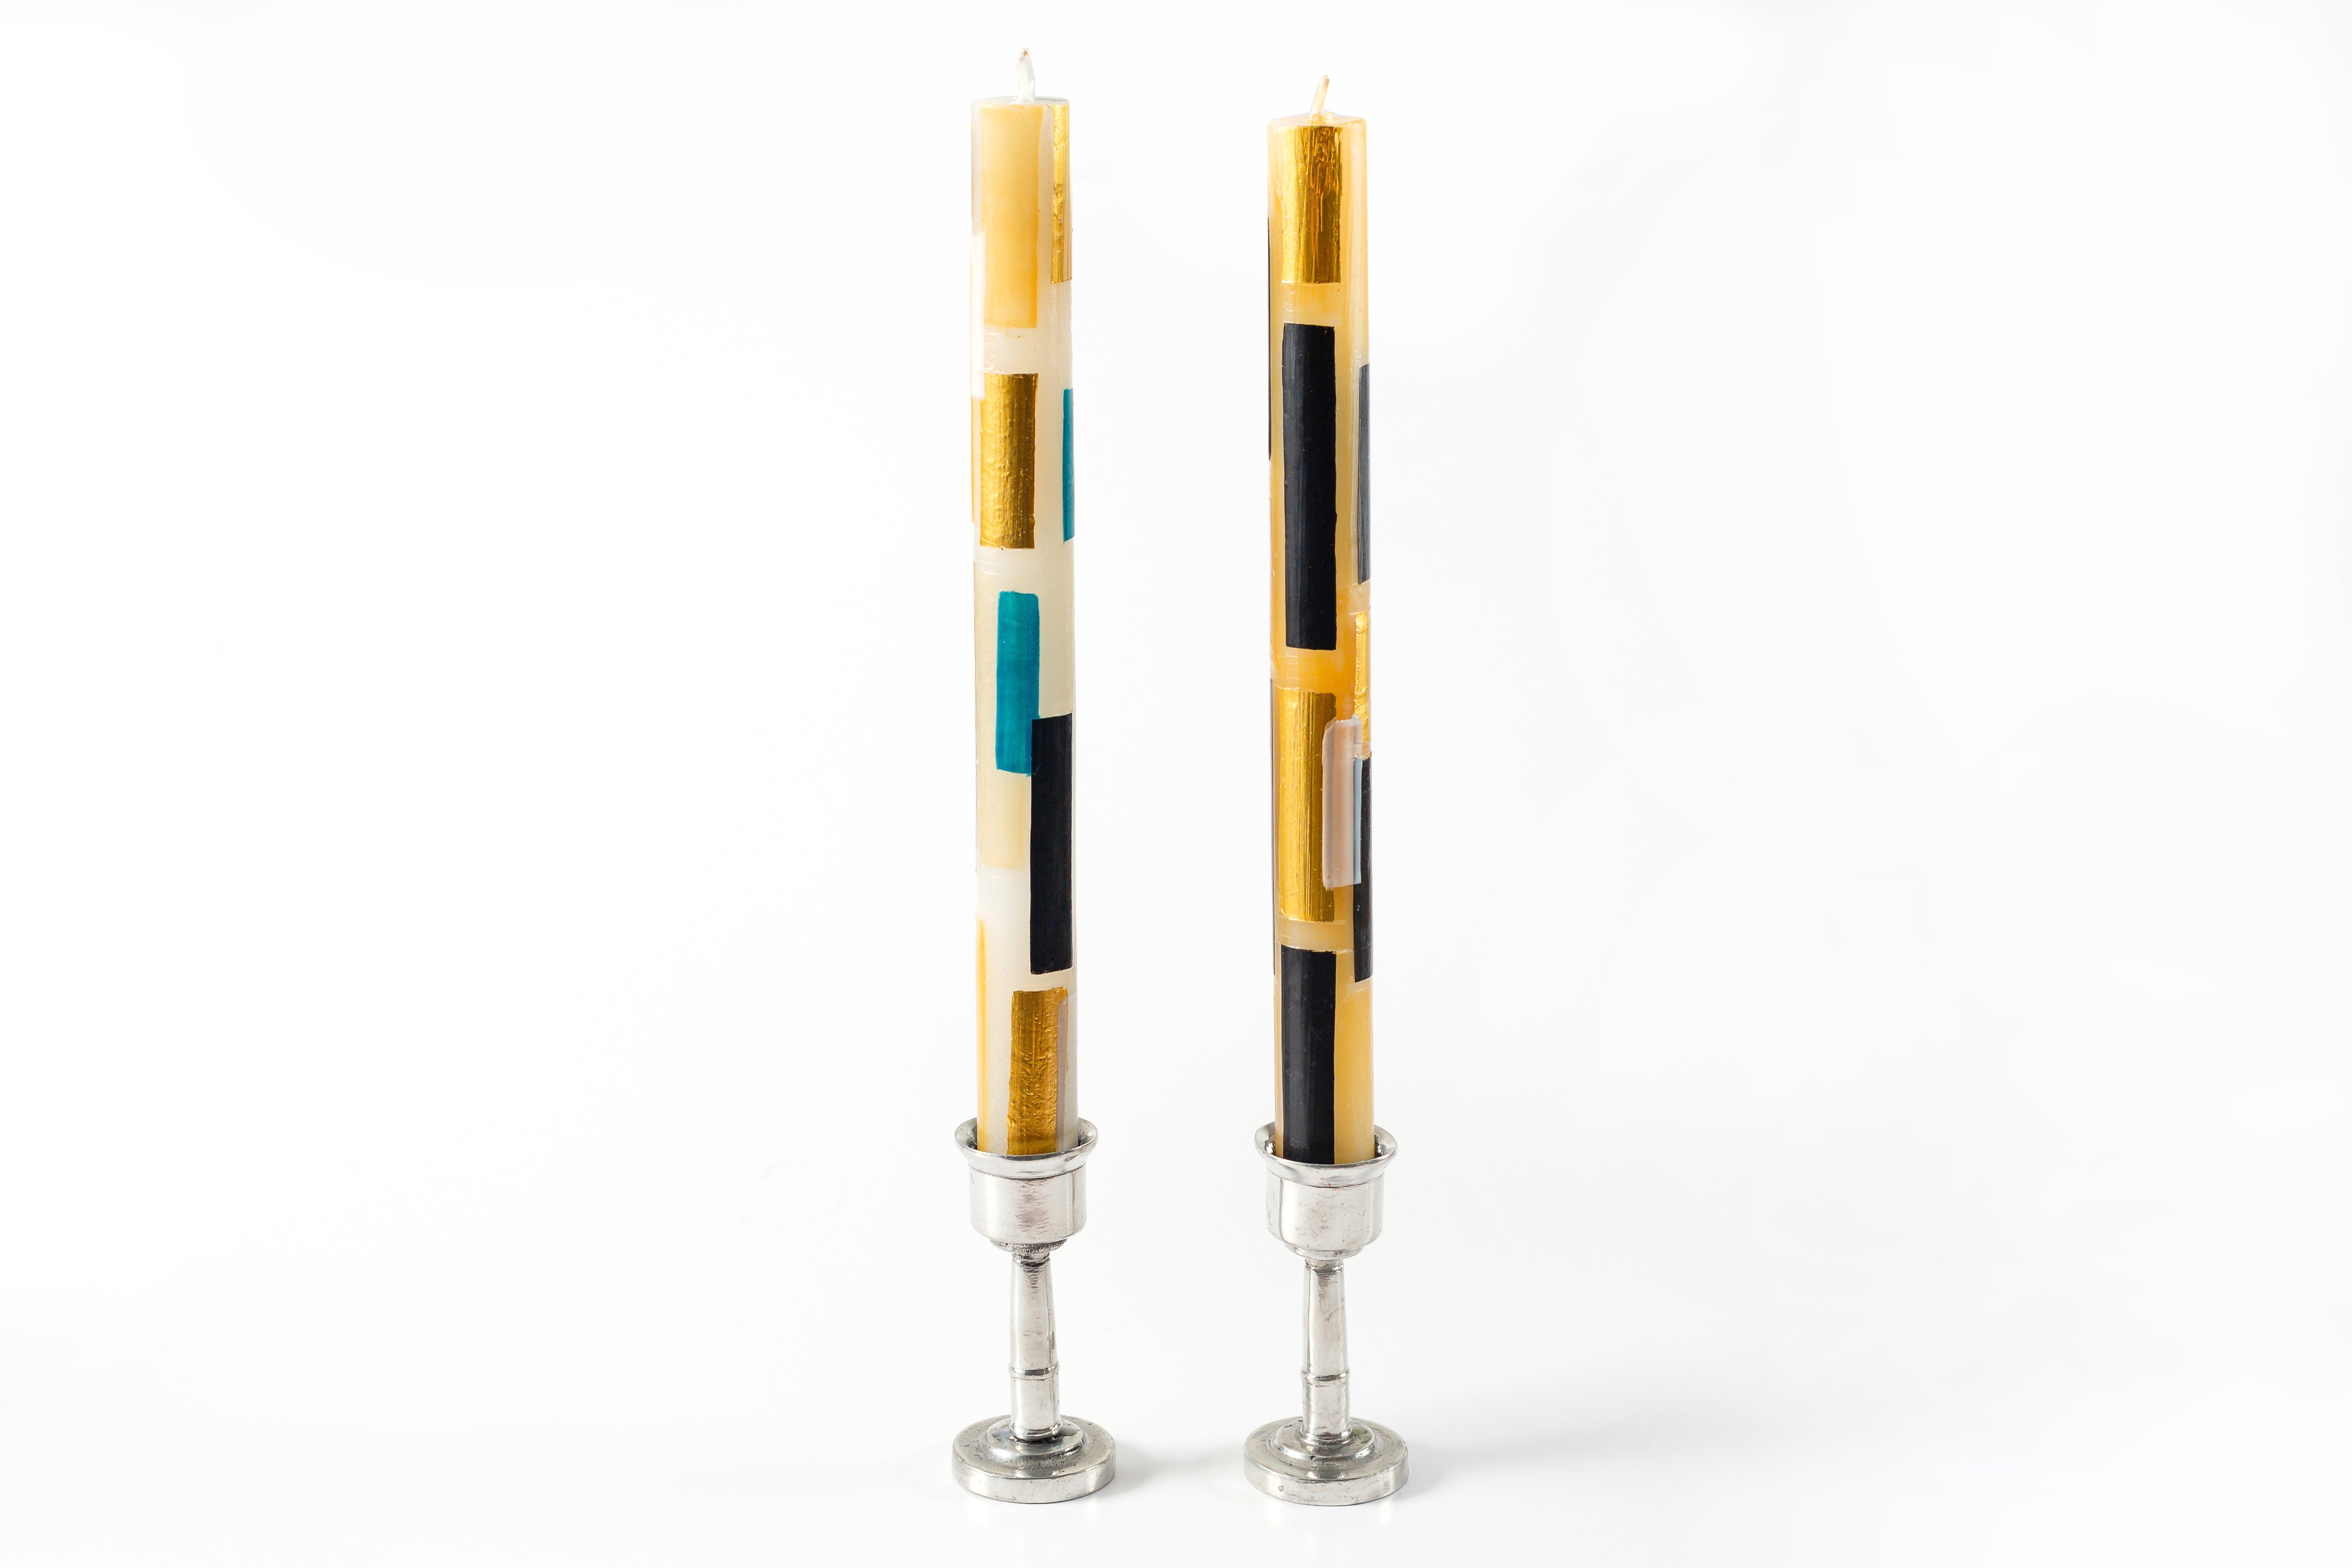 Klimt taper candle pair in pewter taper holders. Cream candles with touches of black, gold along with hints of turquoise make them a contemporary choice. Stunning!